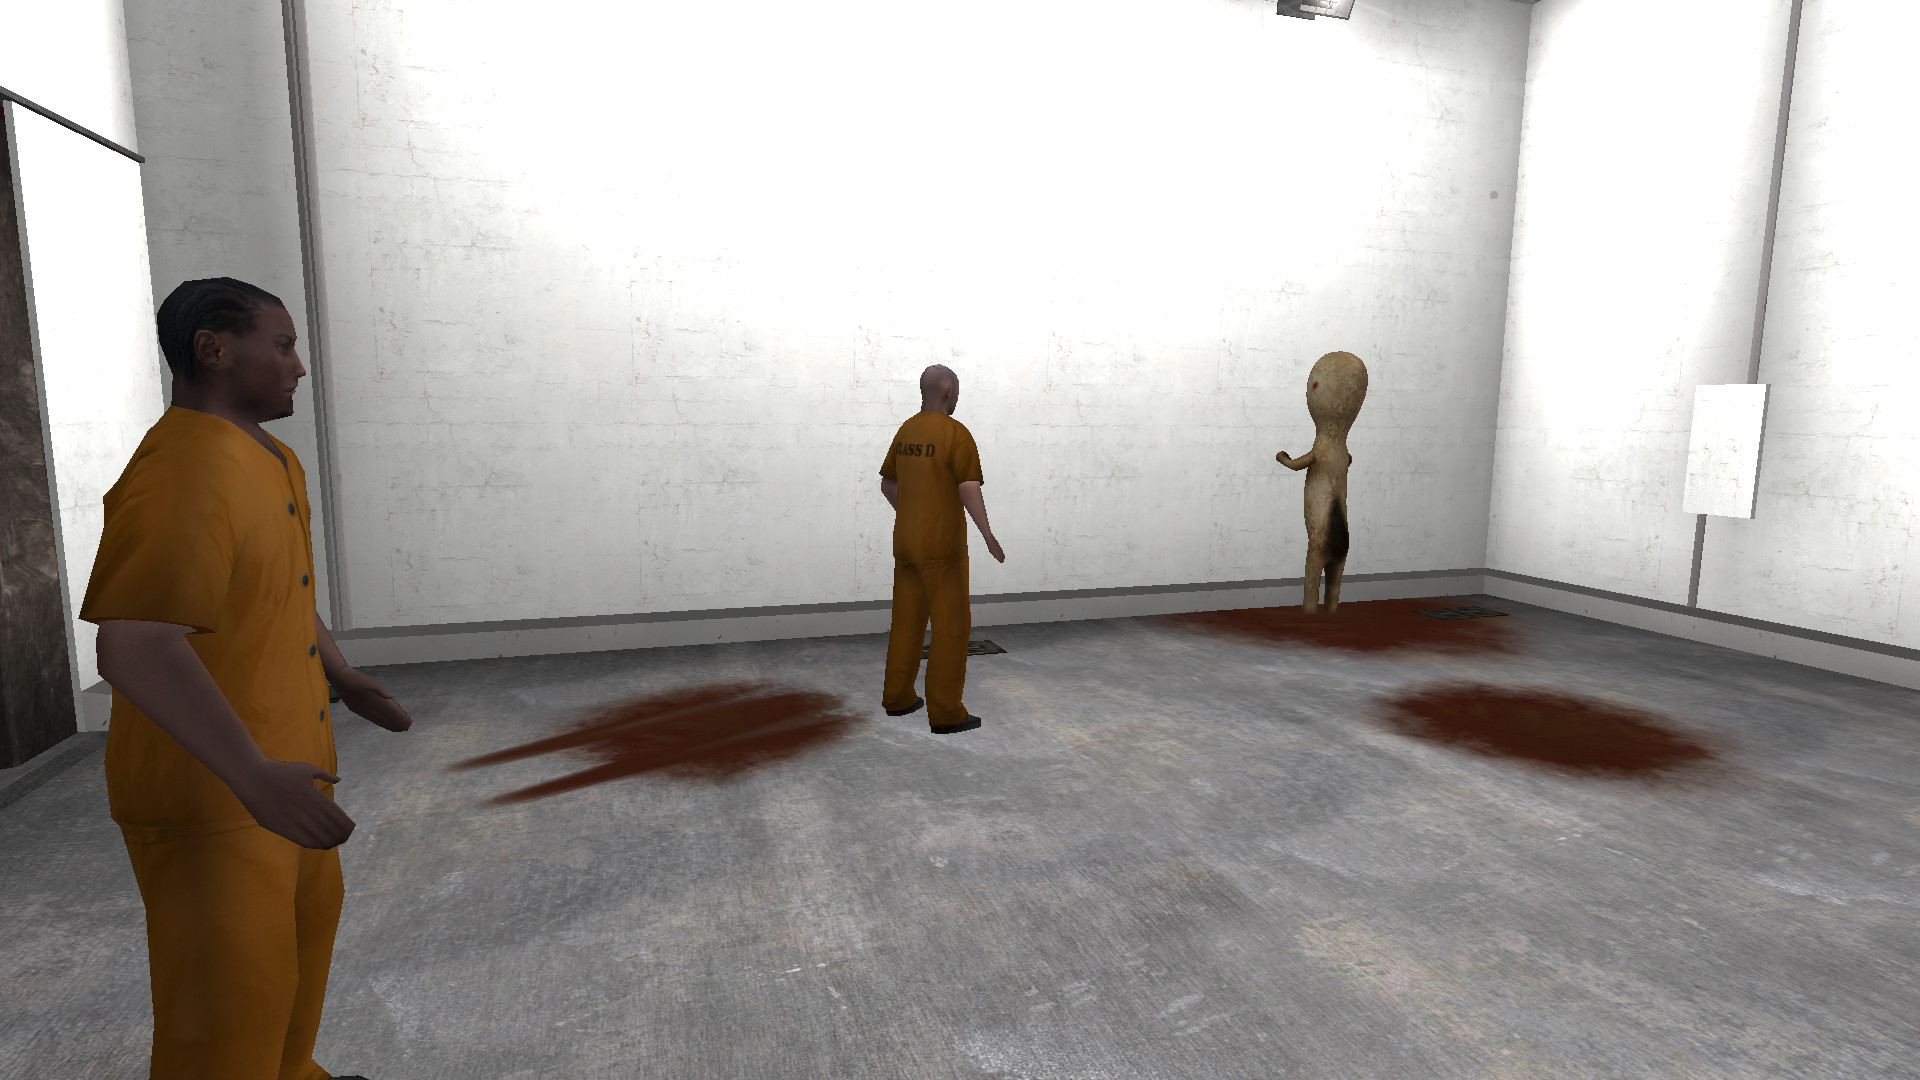 Atelier Steam::SCP-966 from SCP: Containment Breach